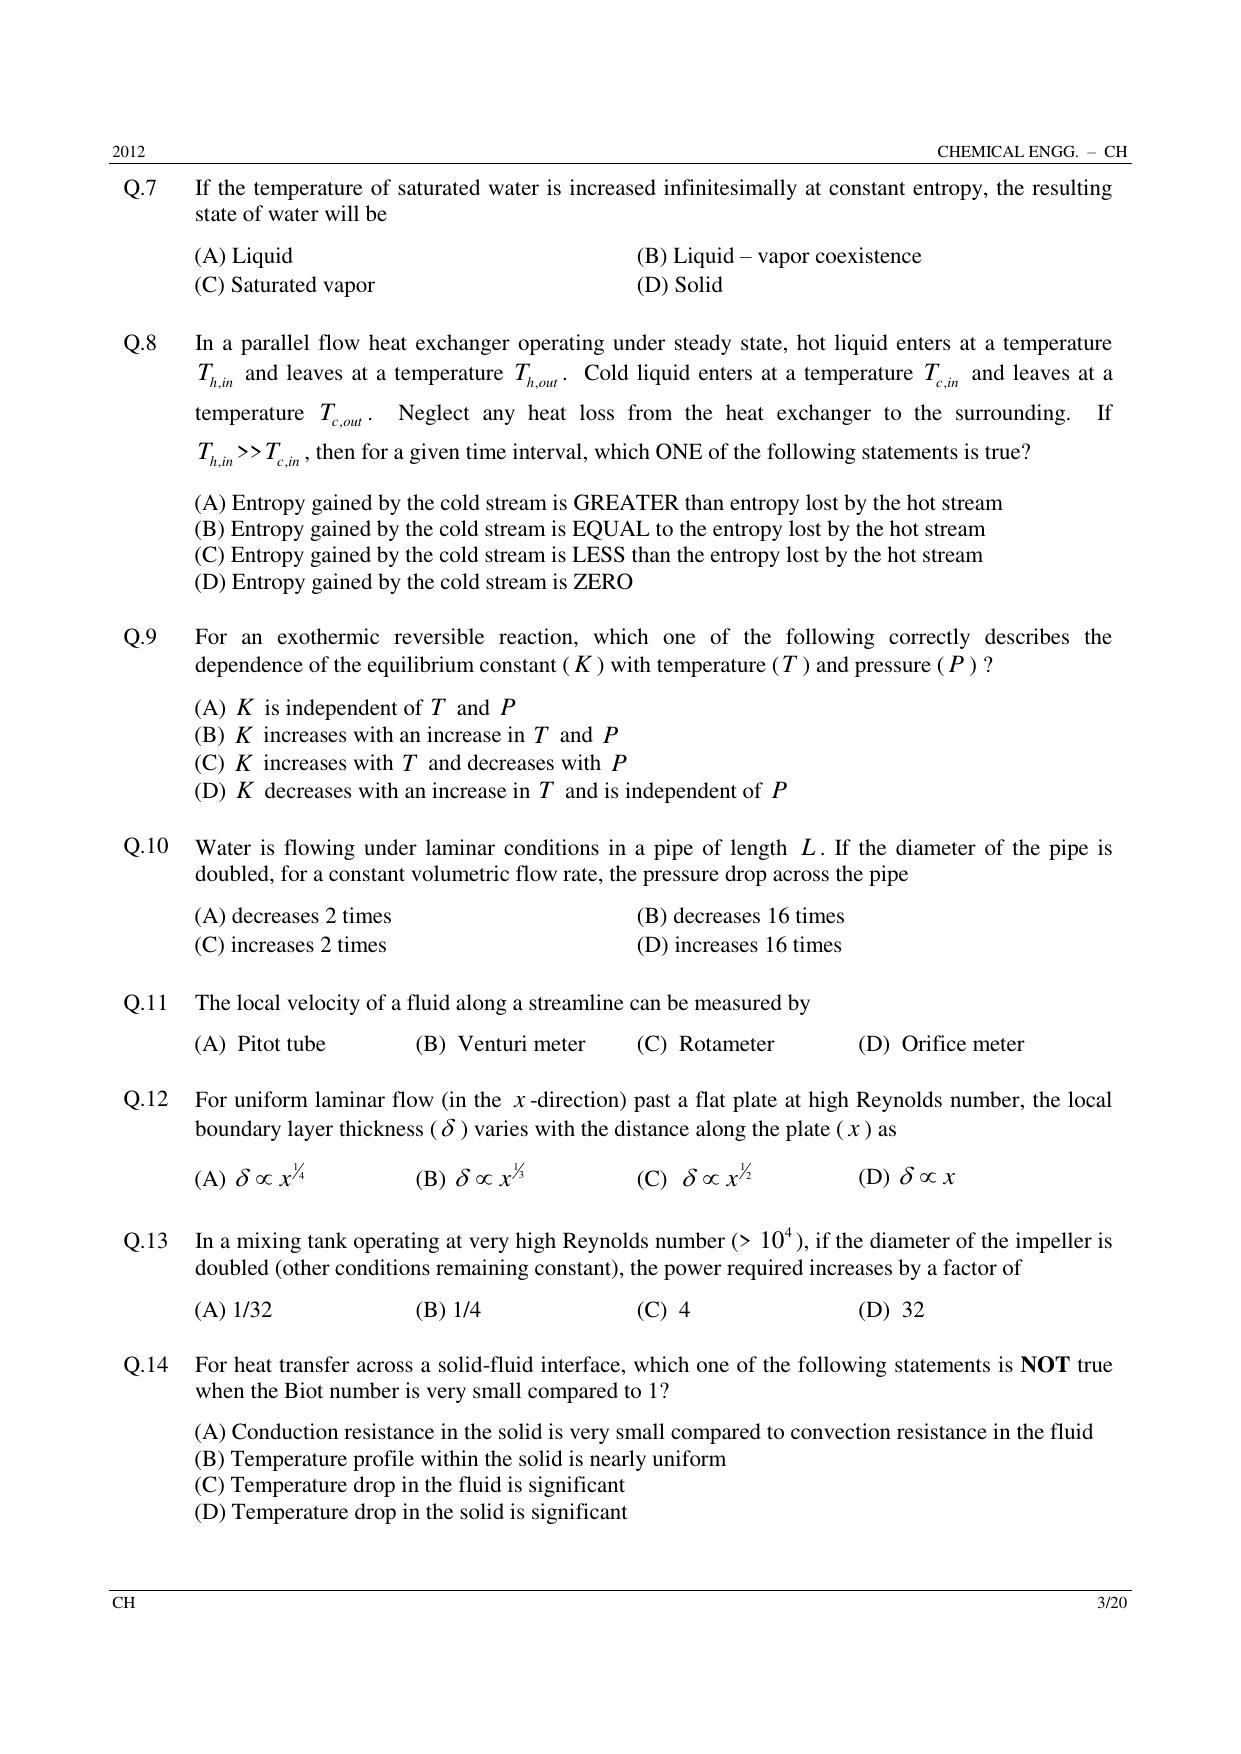 GATE 2012 Chemical Engineering (CH) Question Paper with Answer Key - Page 3